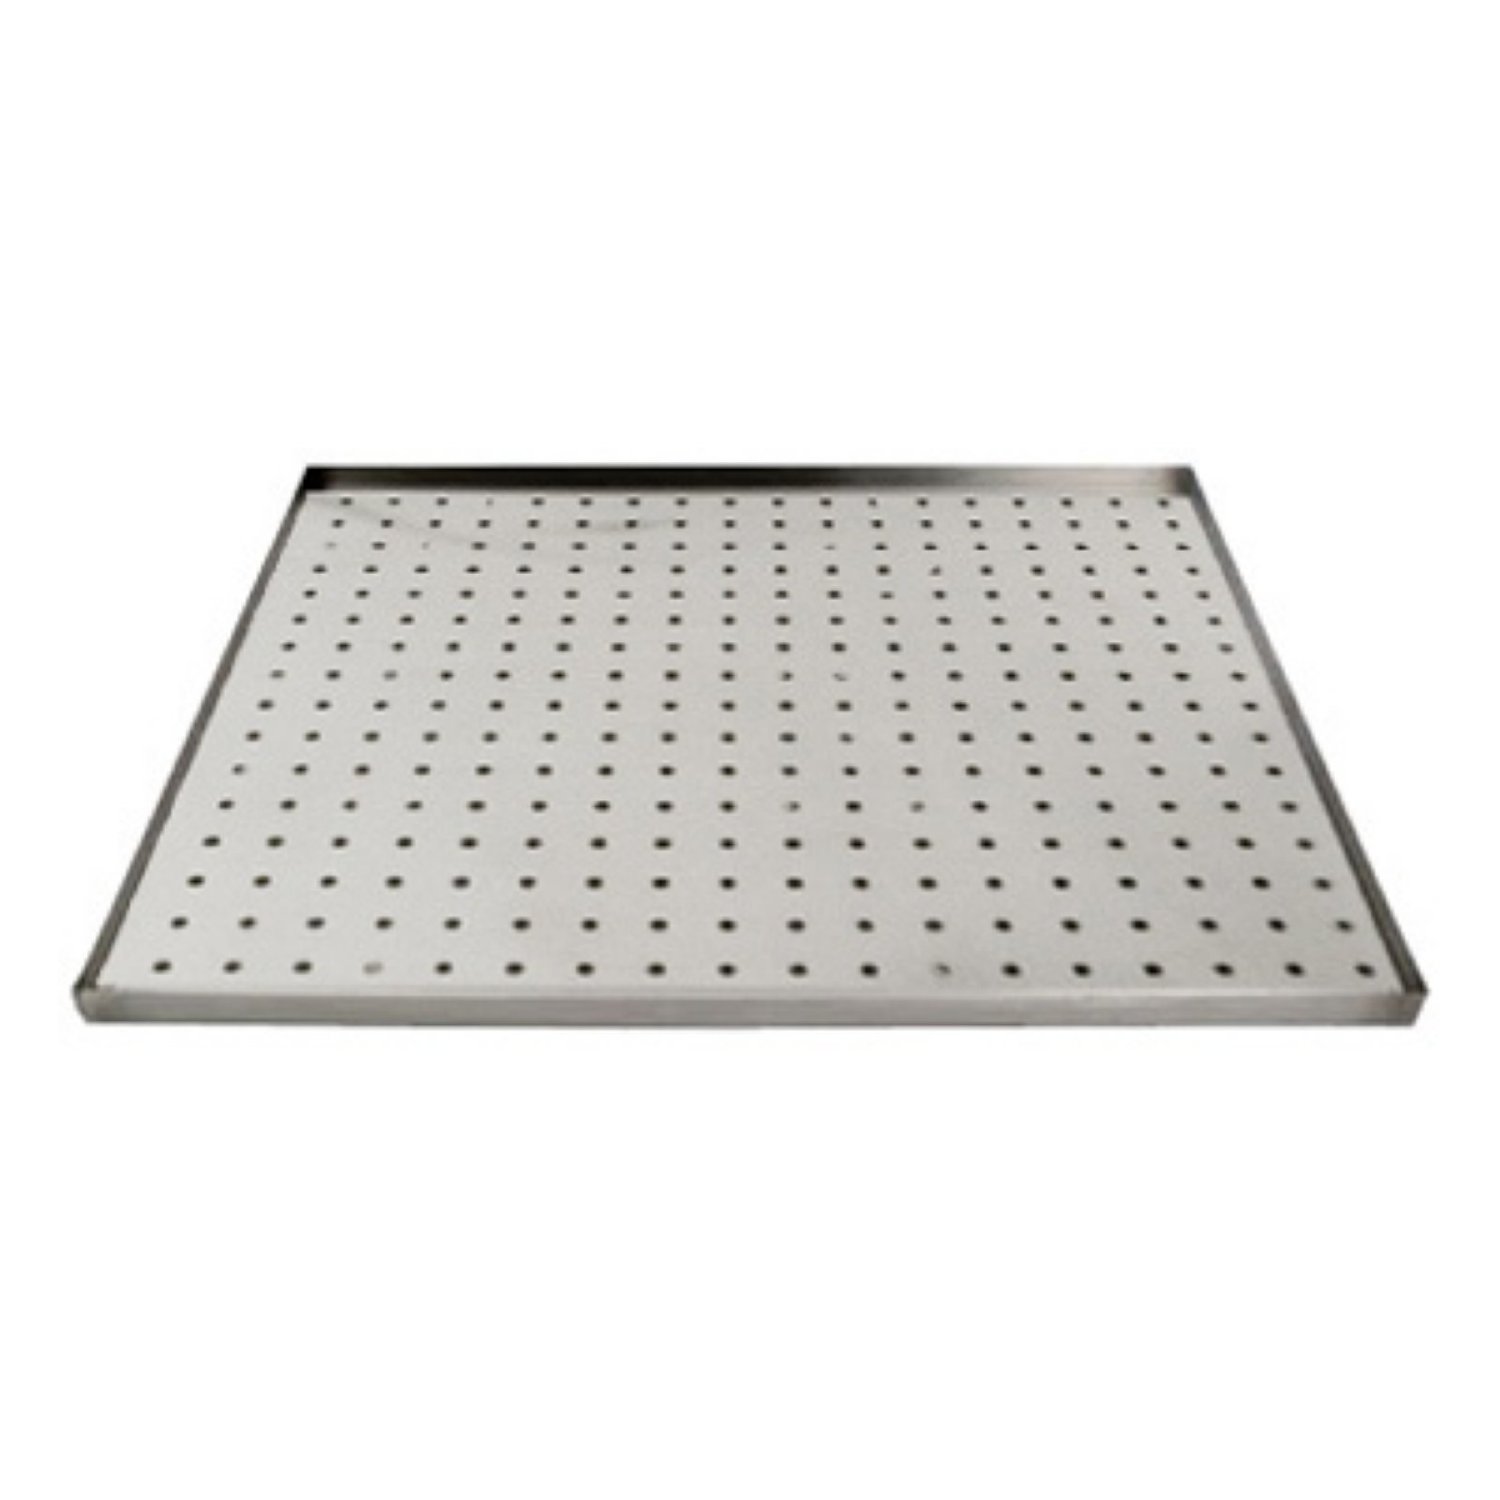 https://dehydratorreview.net/sites/default/files/dehydrator_images/%20Perforated%20Stainless%20Steel%20DehydratorDryingTrayforD5andD10.jpg